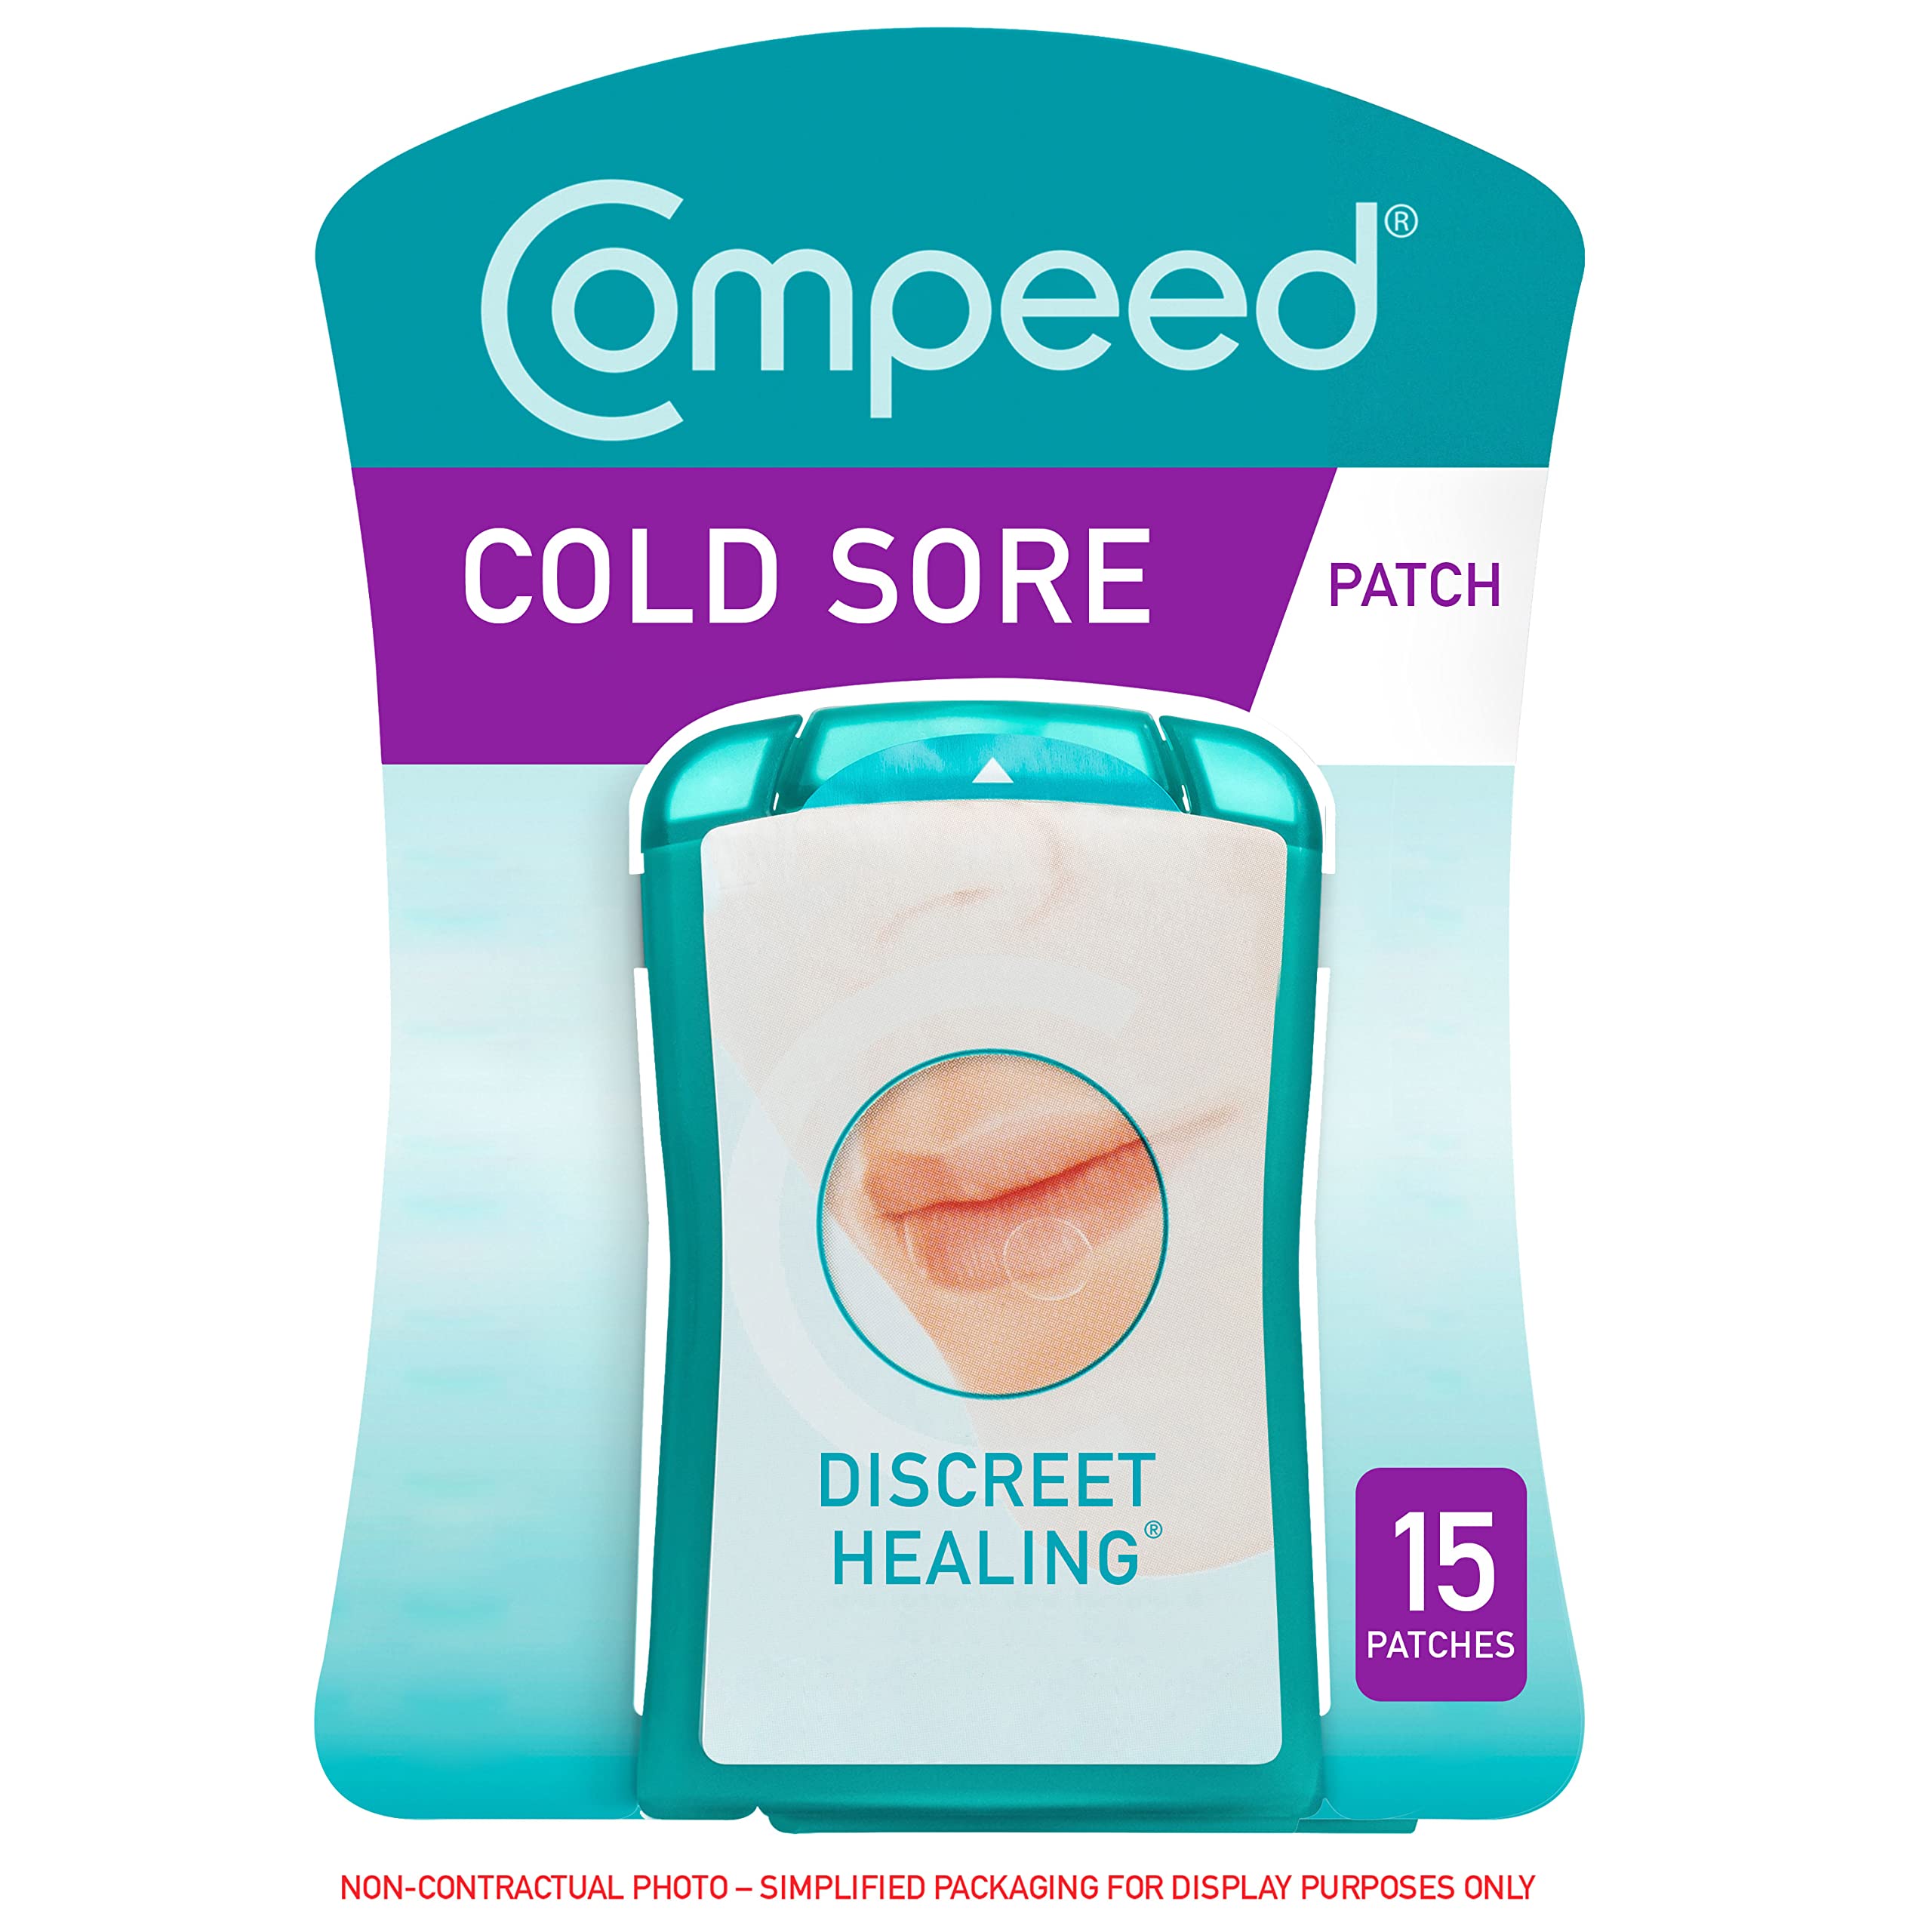 Compeed Cold Sore Discreet Healing Patch, Pack of 15